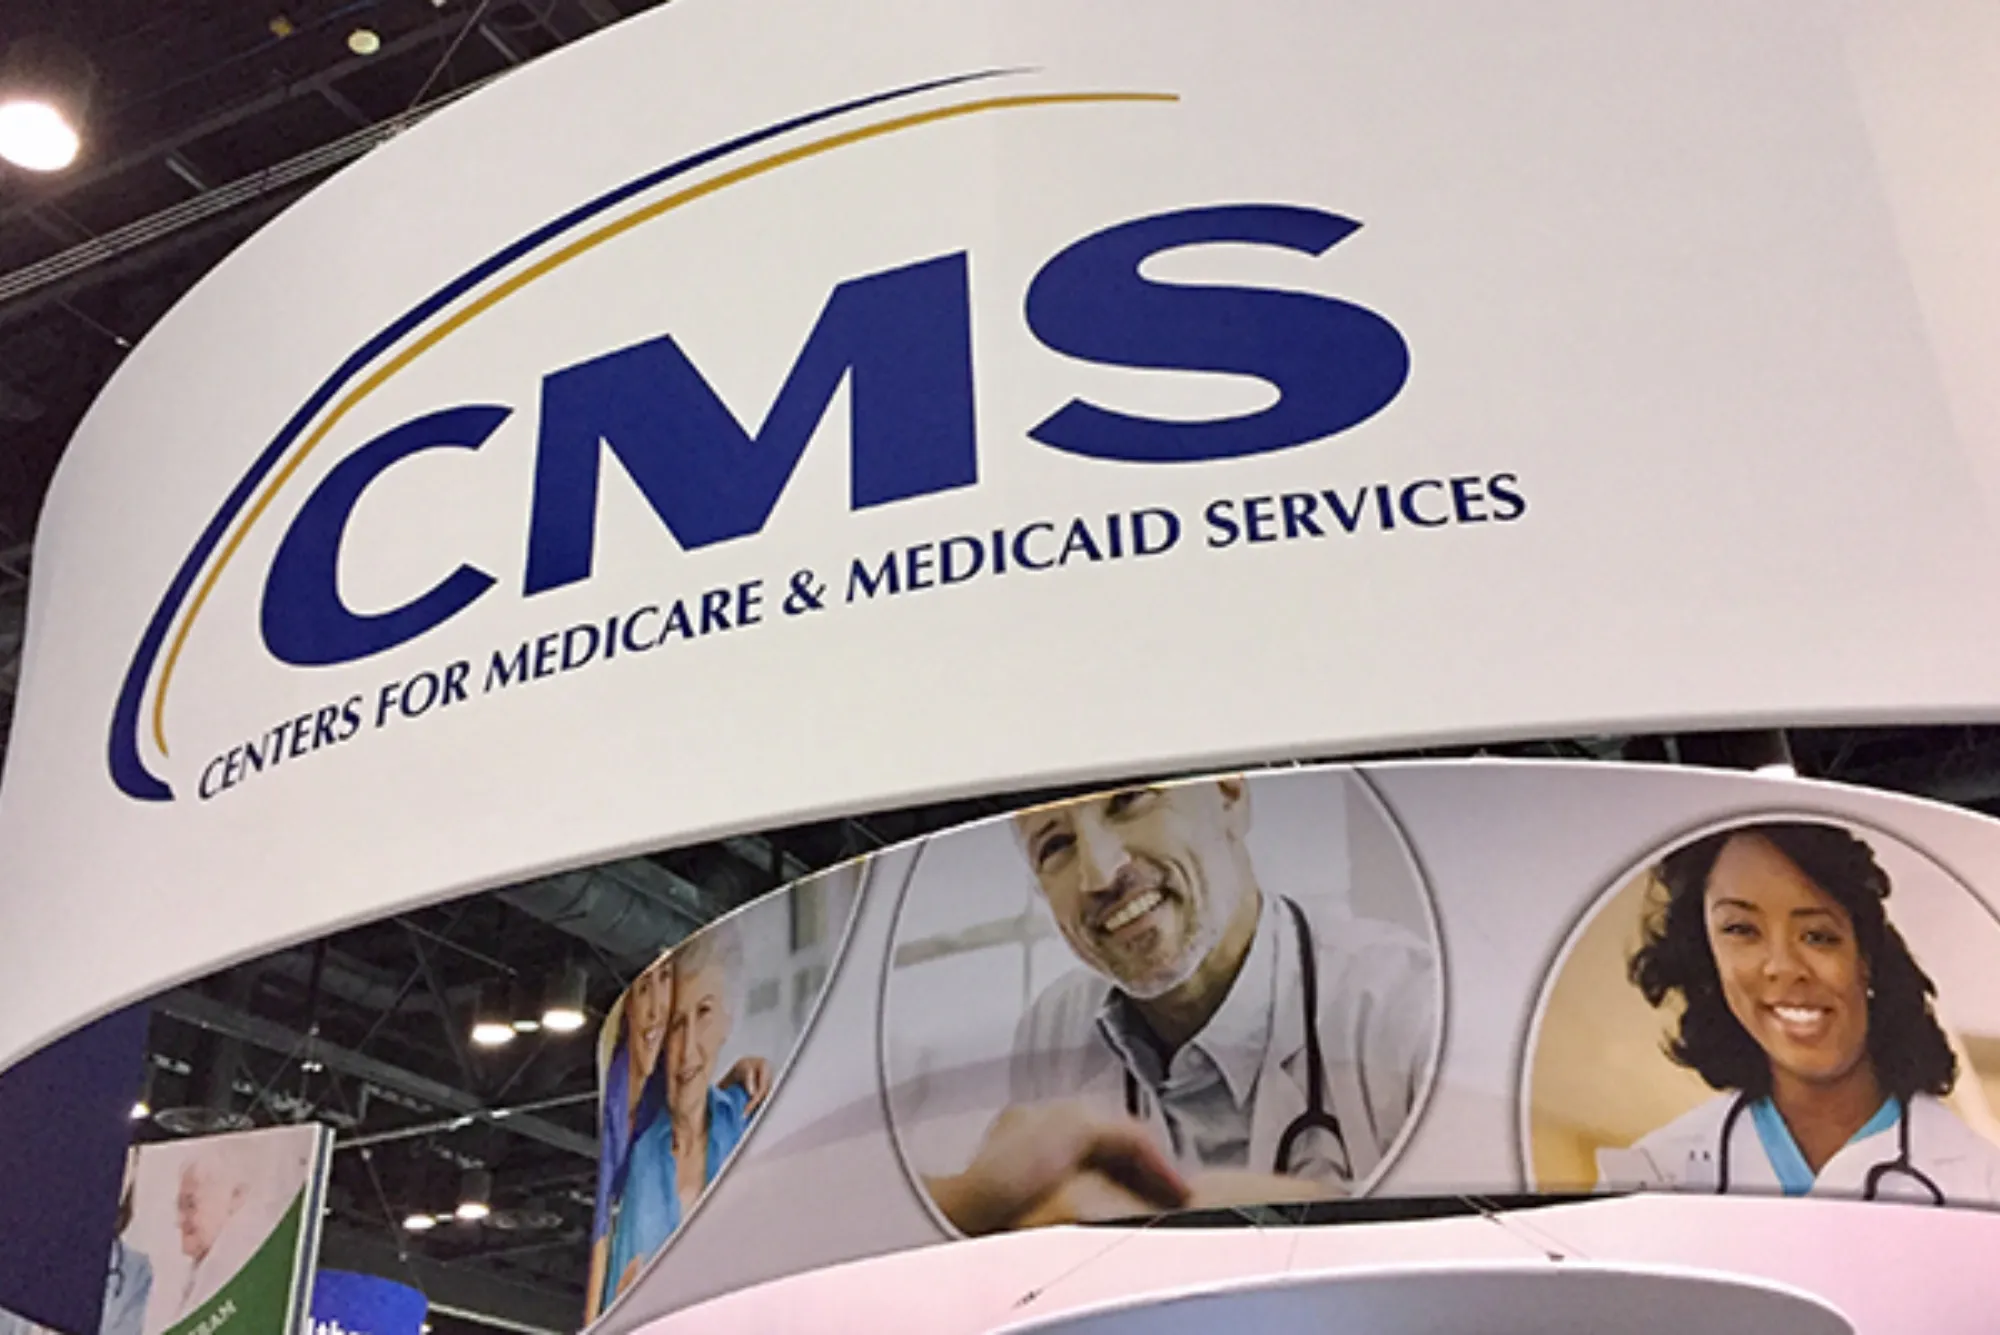 What Is The Role of CMS in Healthcare